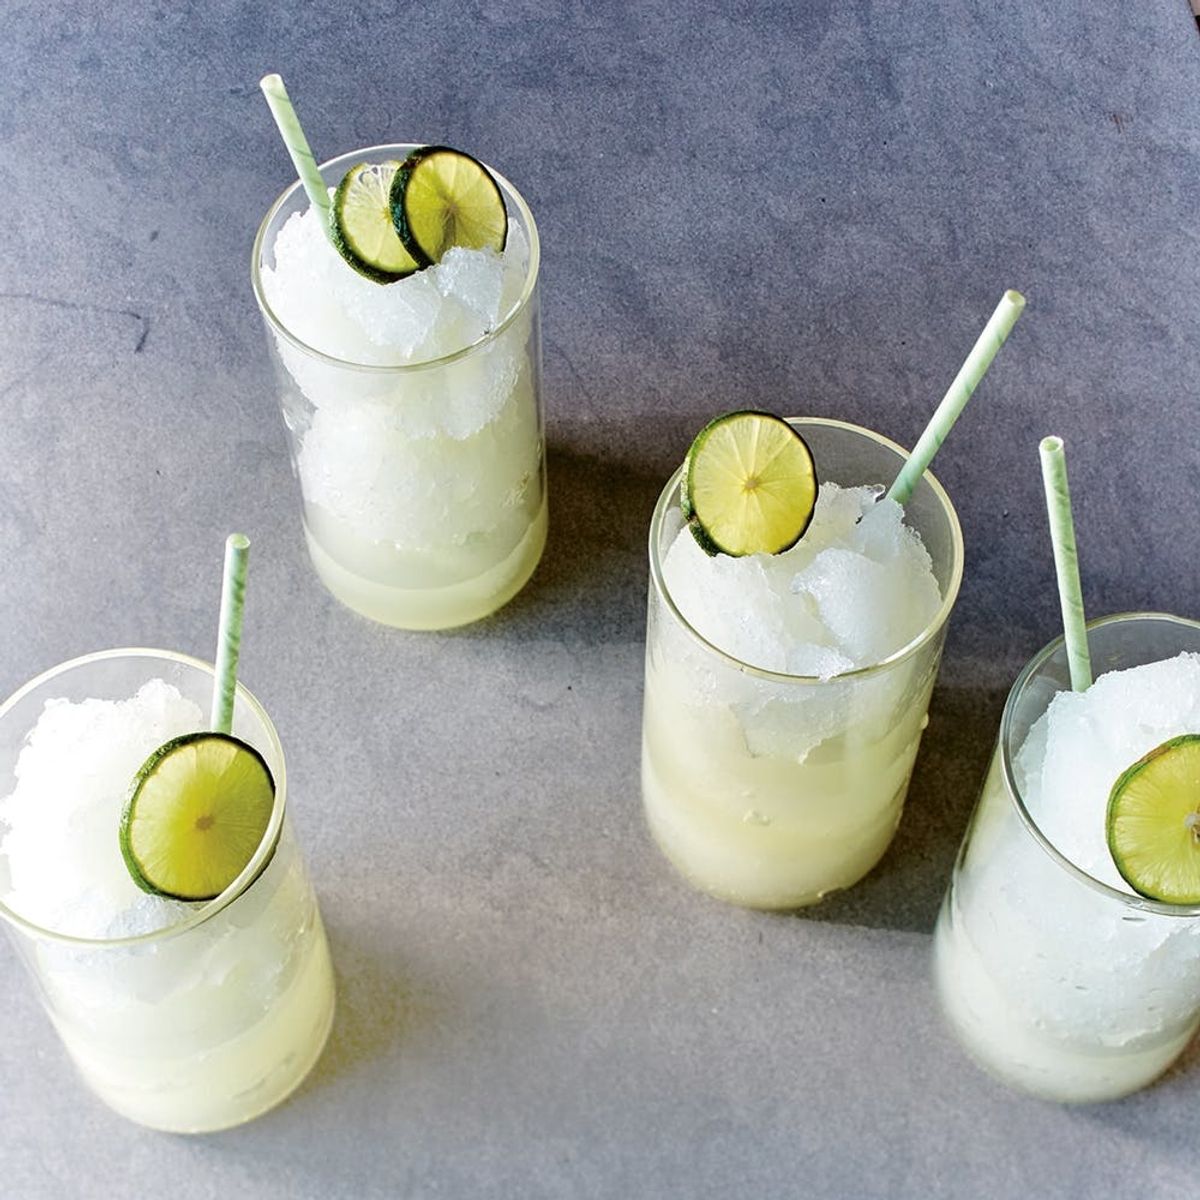 The Key to a Really Good Frozen Margarita